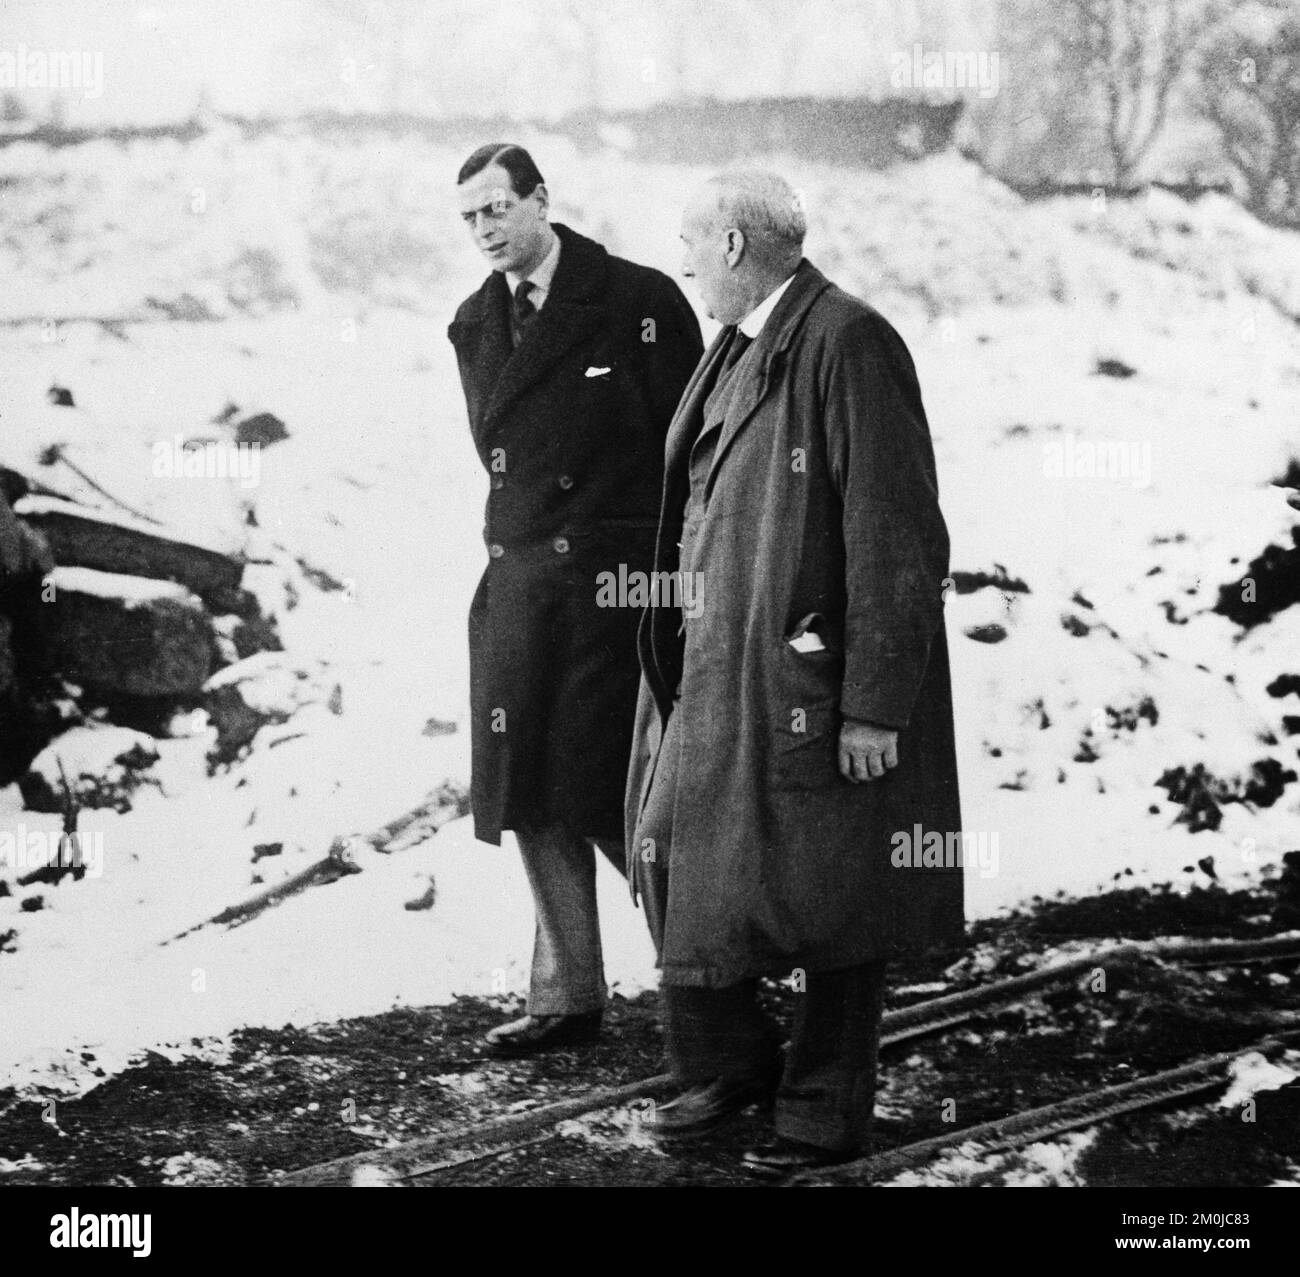 Vintage black and white photograph taken on 18th December 1935 showing Prince George, The Duke Of Kent, during a visit to Waingroves Brickyard in Codnor in Derbyshire, England. The Duke was killed in a air crash whilst serving in The Royal Air Force, in 1942. Stock Photo